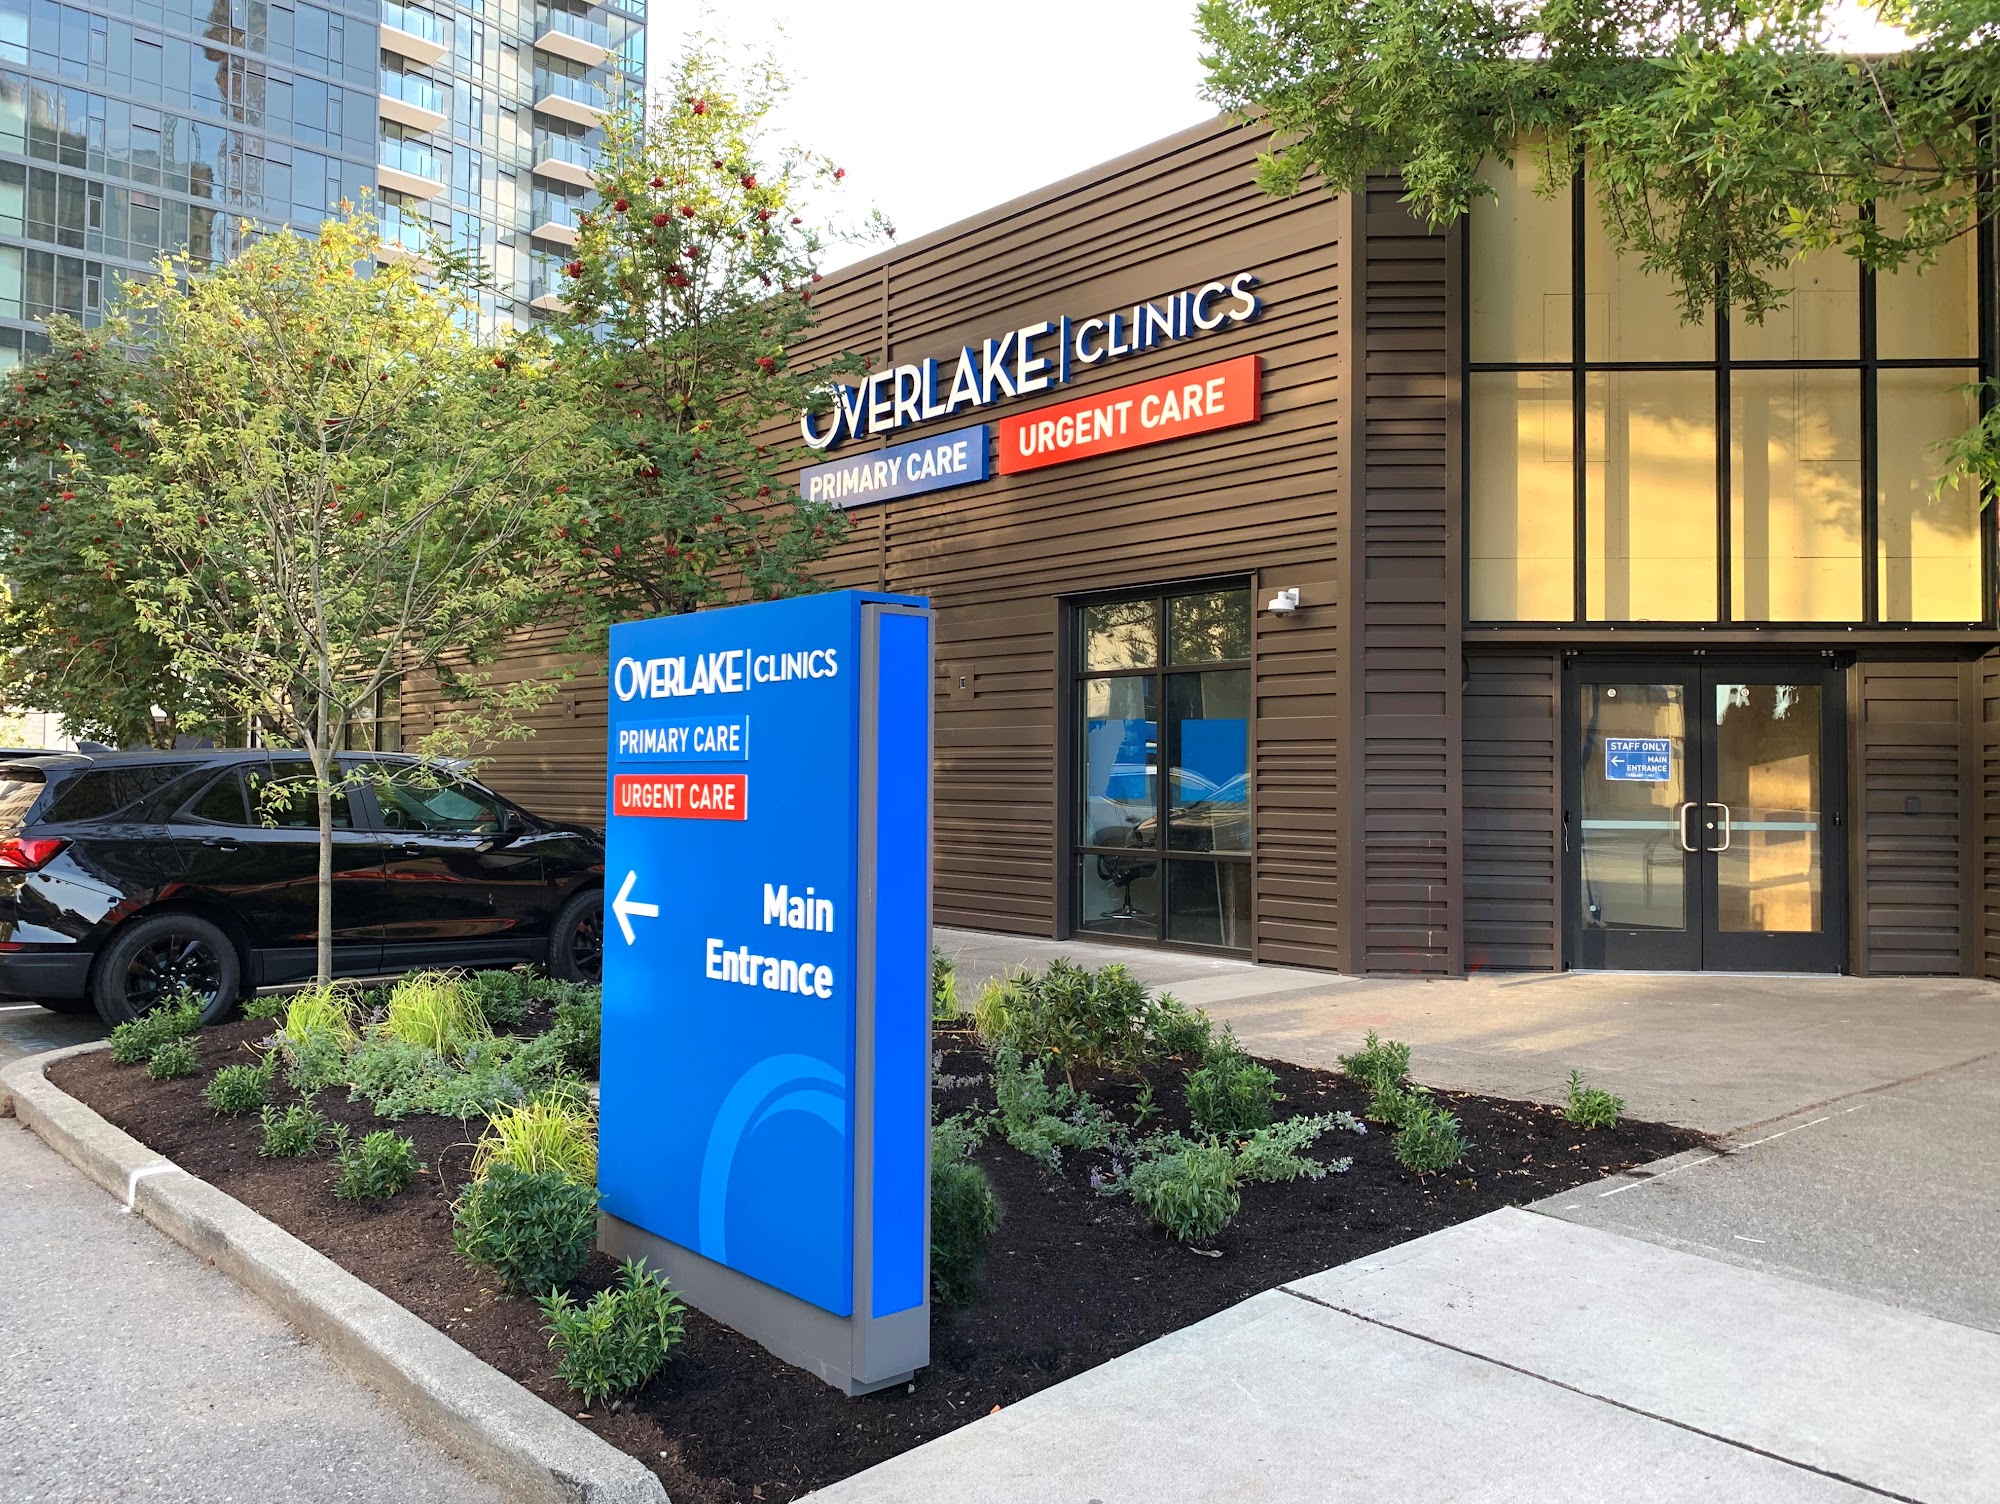 Overlake Clinics Downtown Bellevue Primary Care